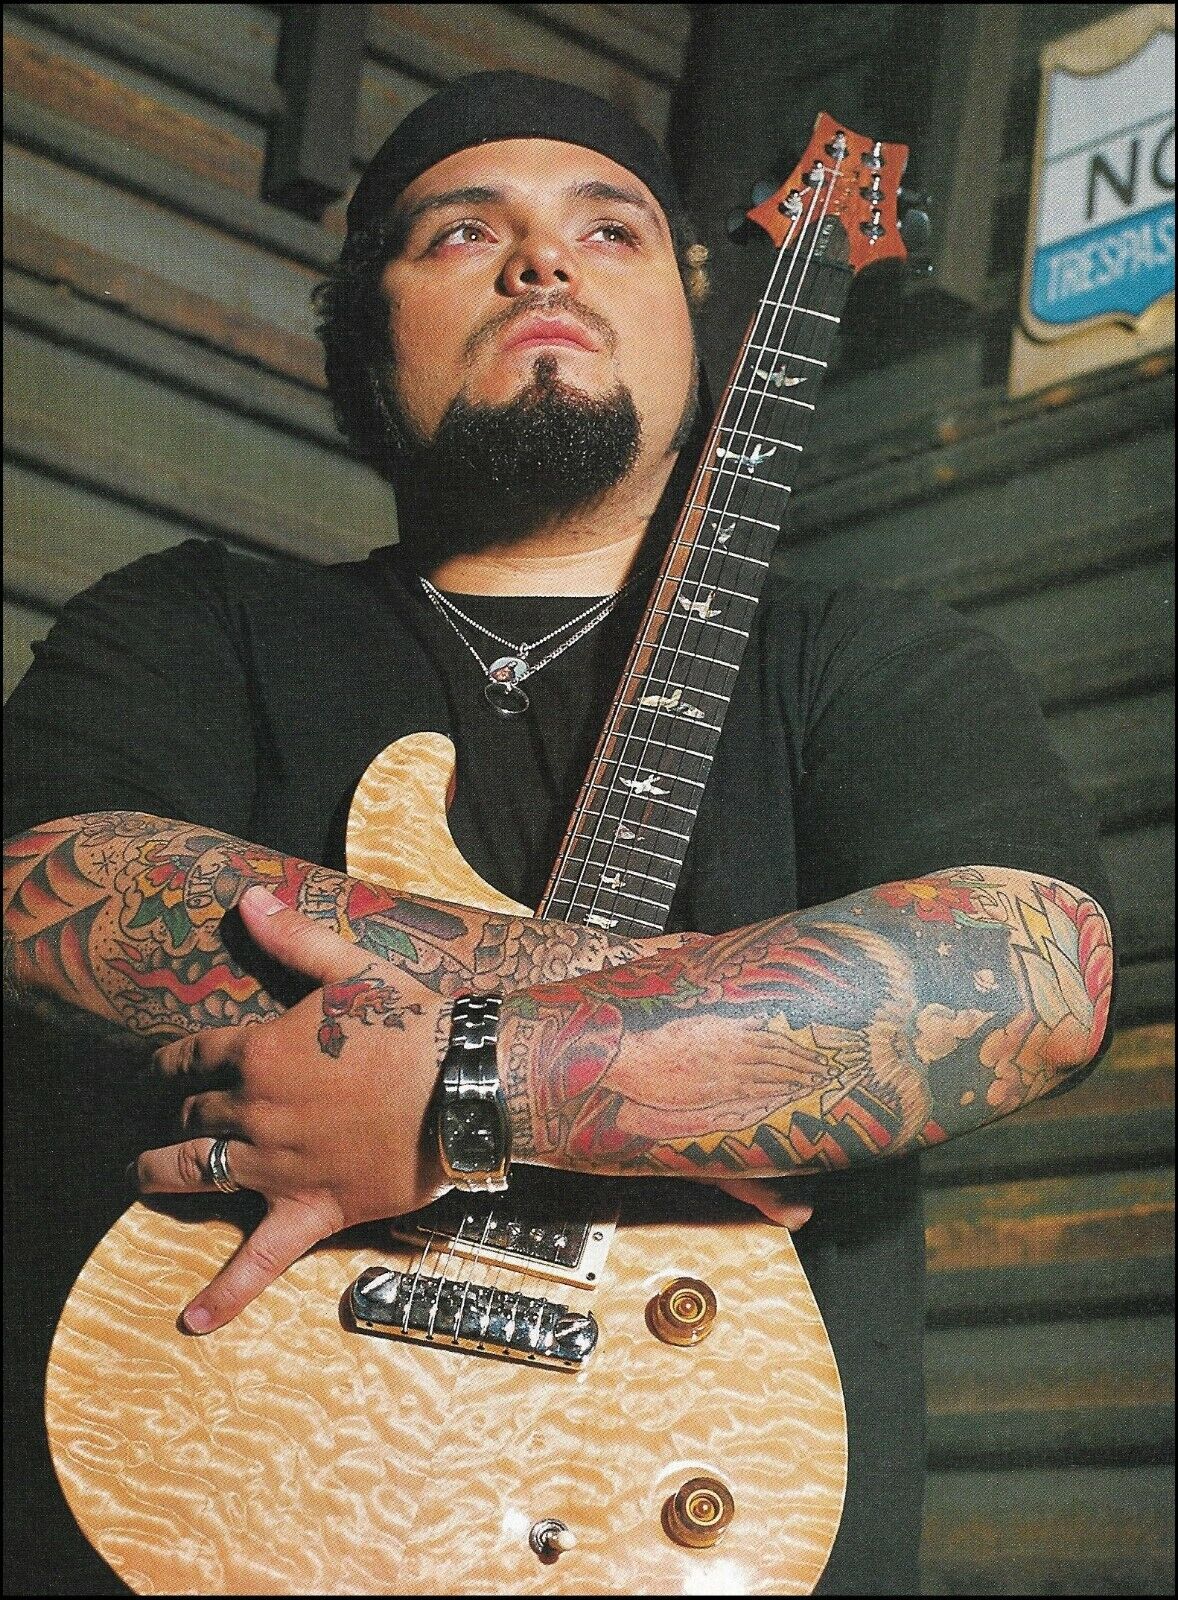 P.O.D. Marcos Curiel with his PRS electric guitar 2006 color pin-up photo print